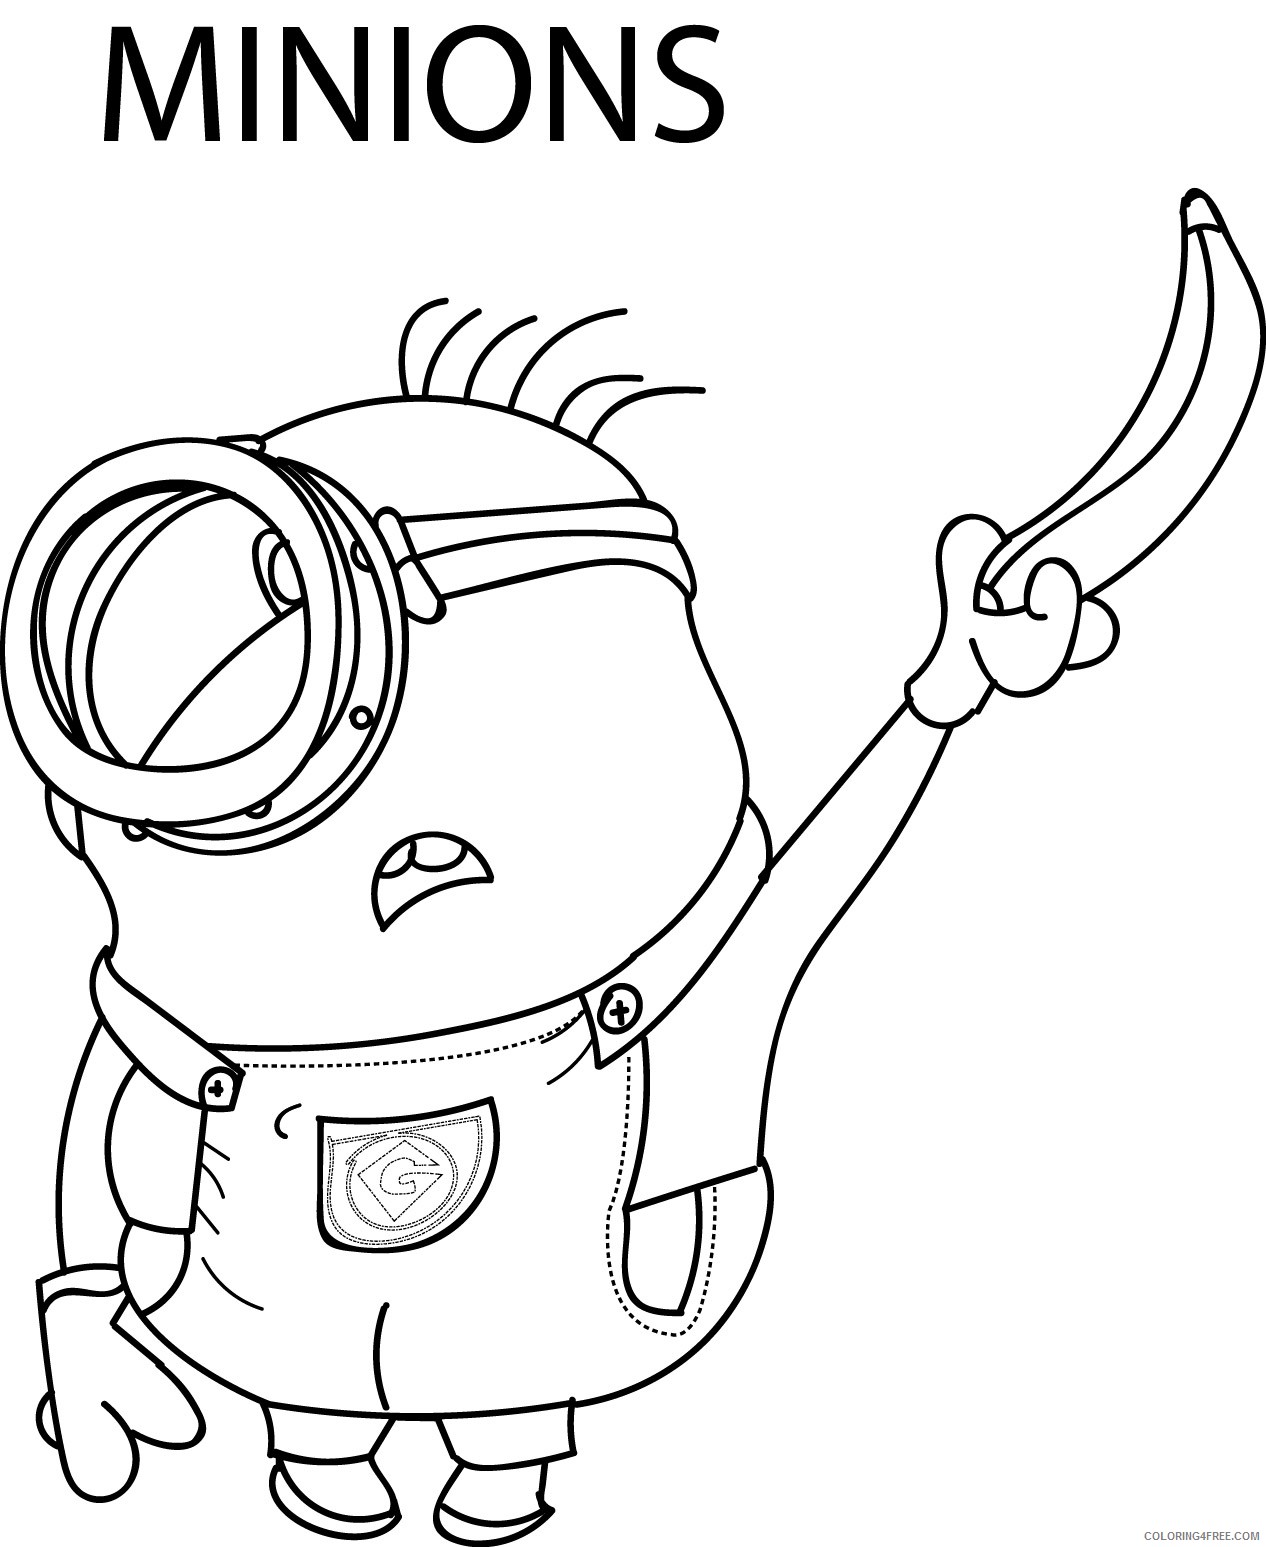 minions coloring pages holding banana Coloring4free